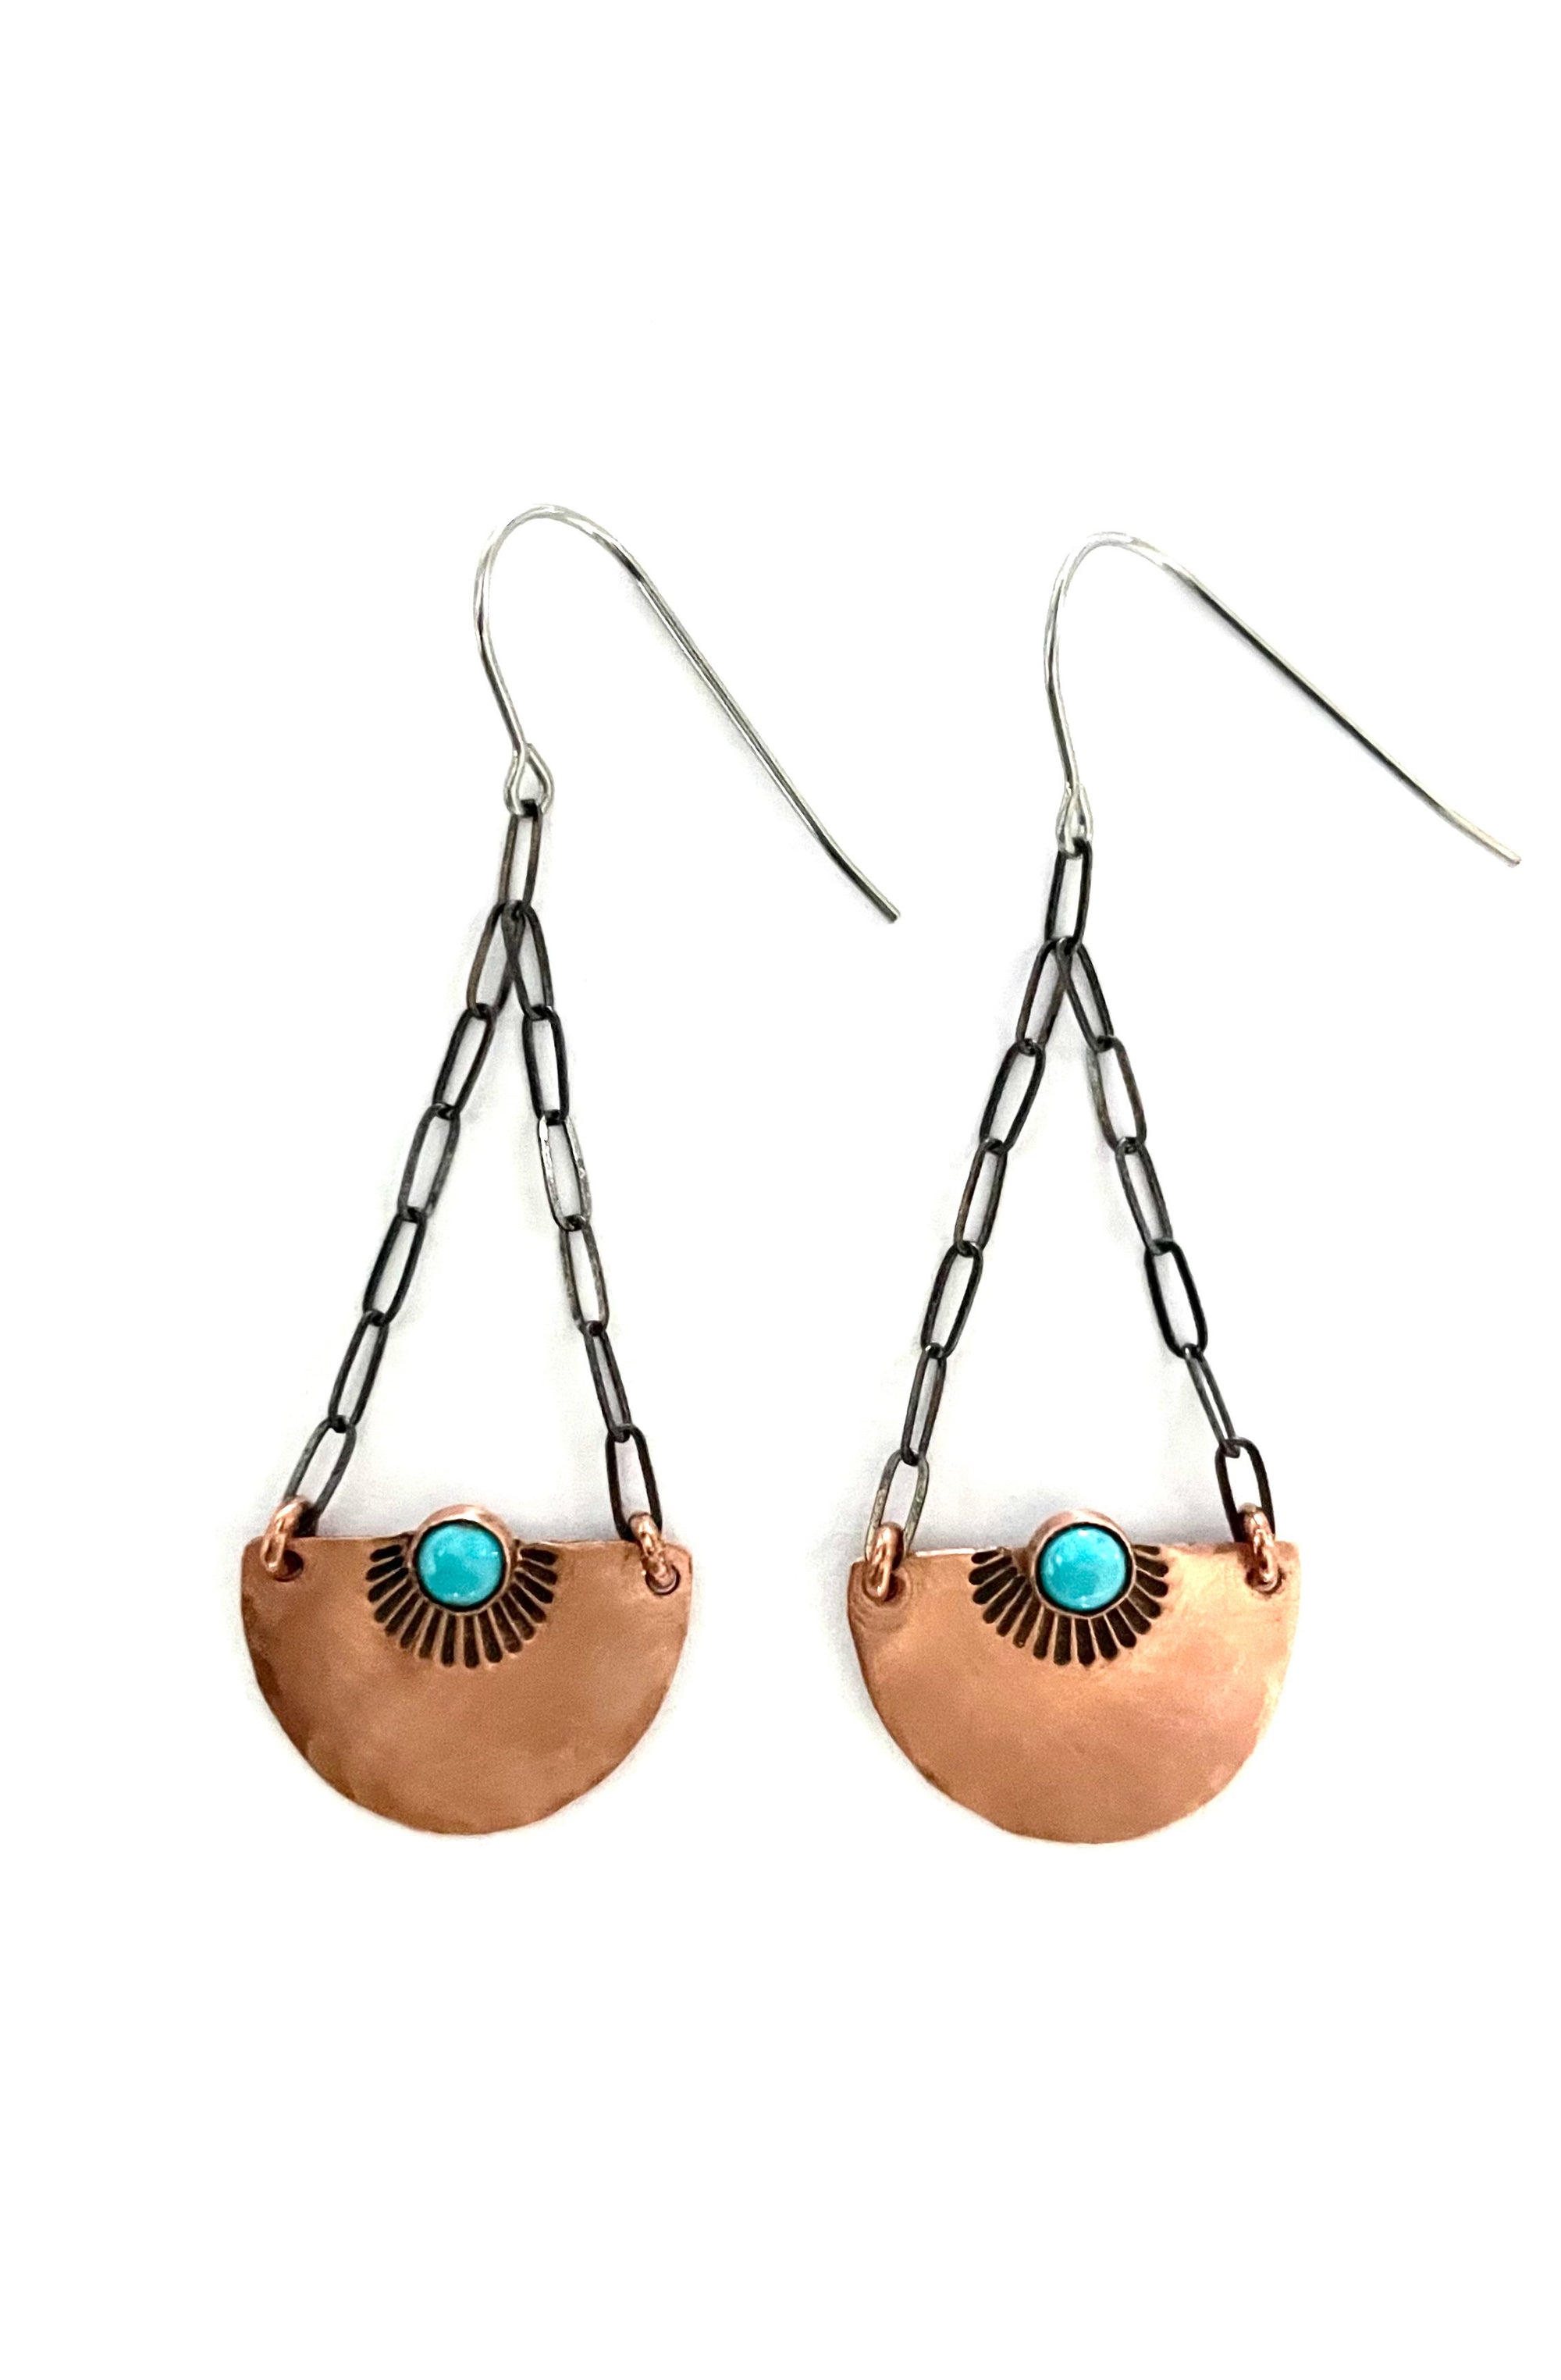 Turquoise Half Moon Crescent and Chain Earrings, Copper